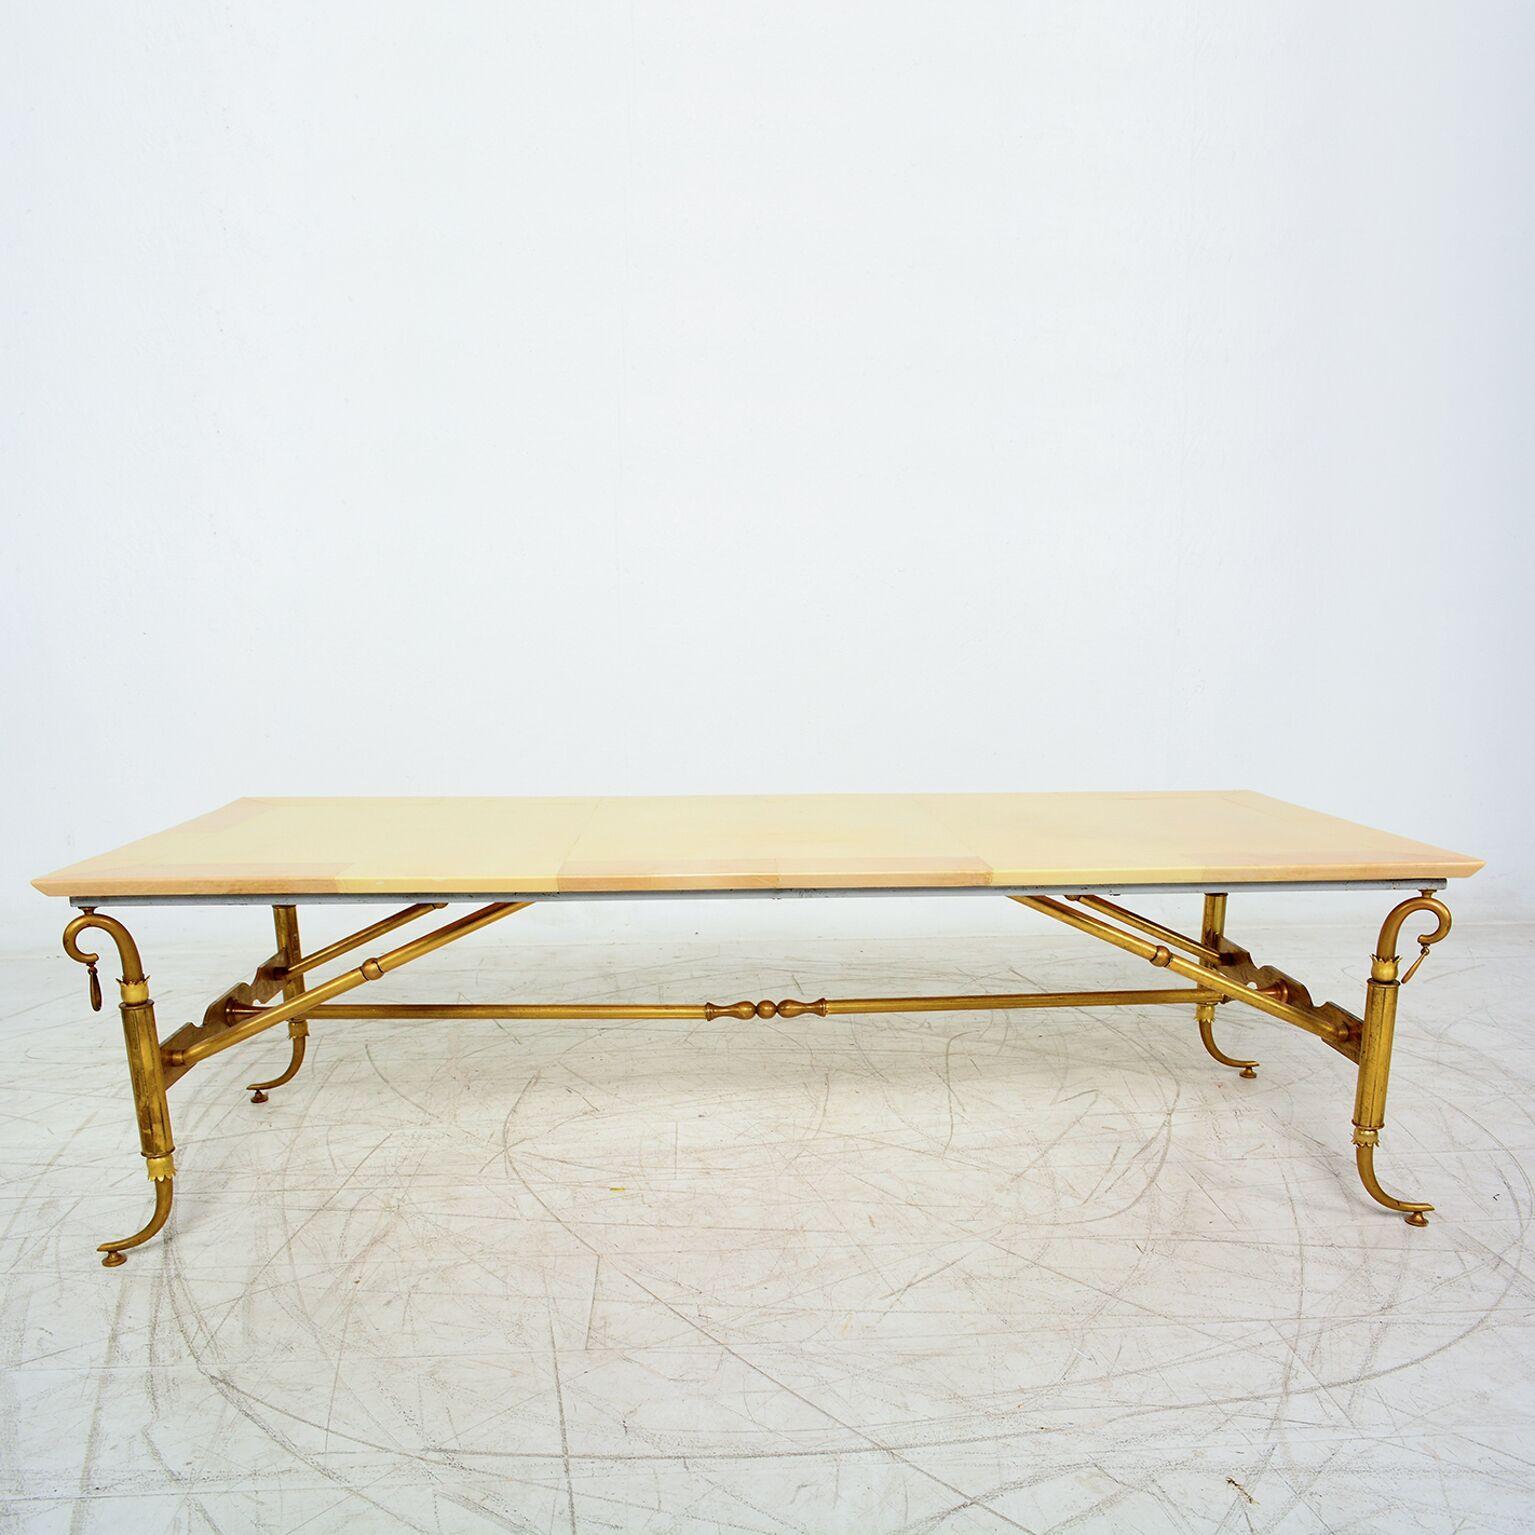 1950s Arturo Pani Sculptural Coffee Table Parchment and Brass Hollywood Regency 1